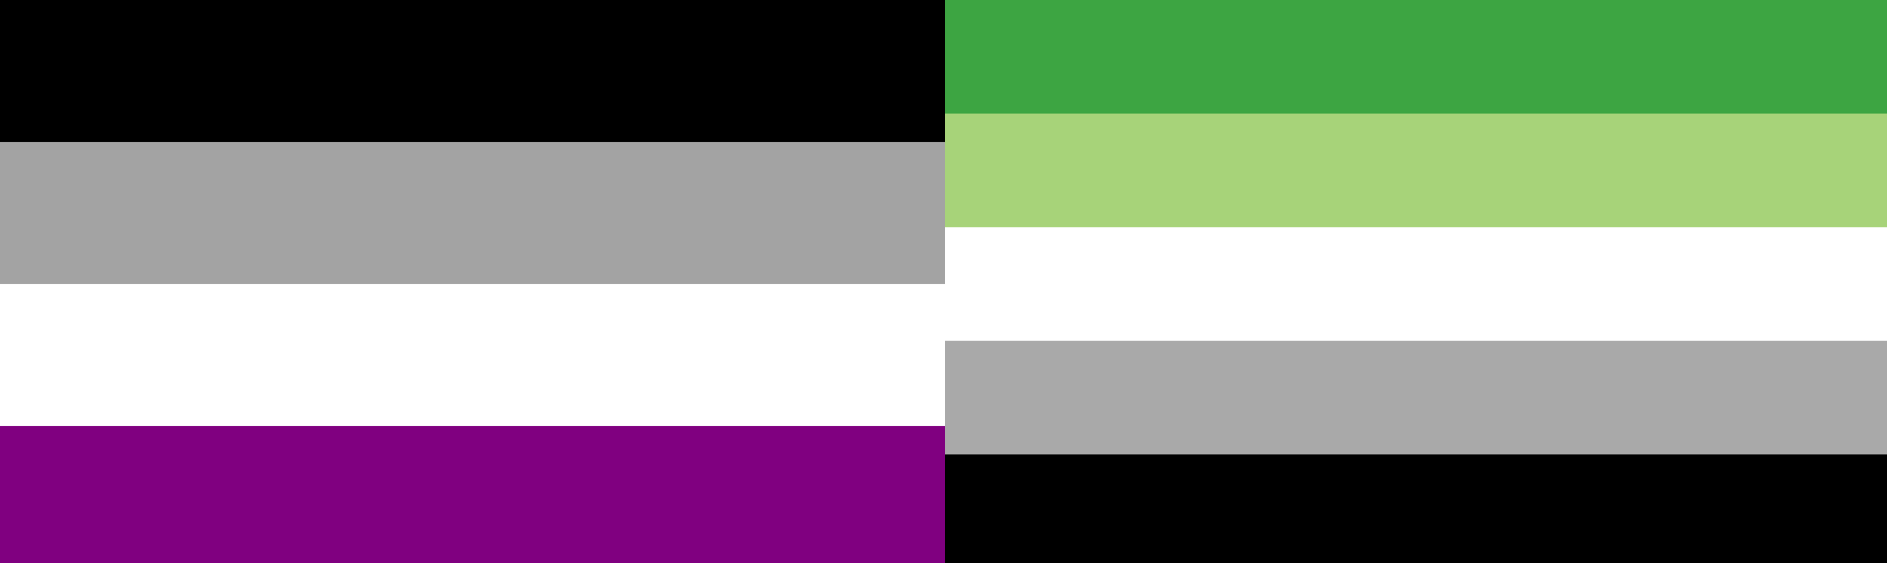 Half of the screen is taken up by the asexuality flag, and half by the aromantic flag
